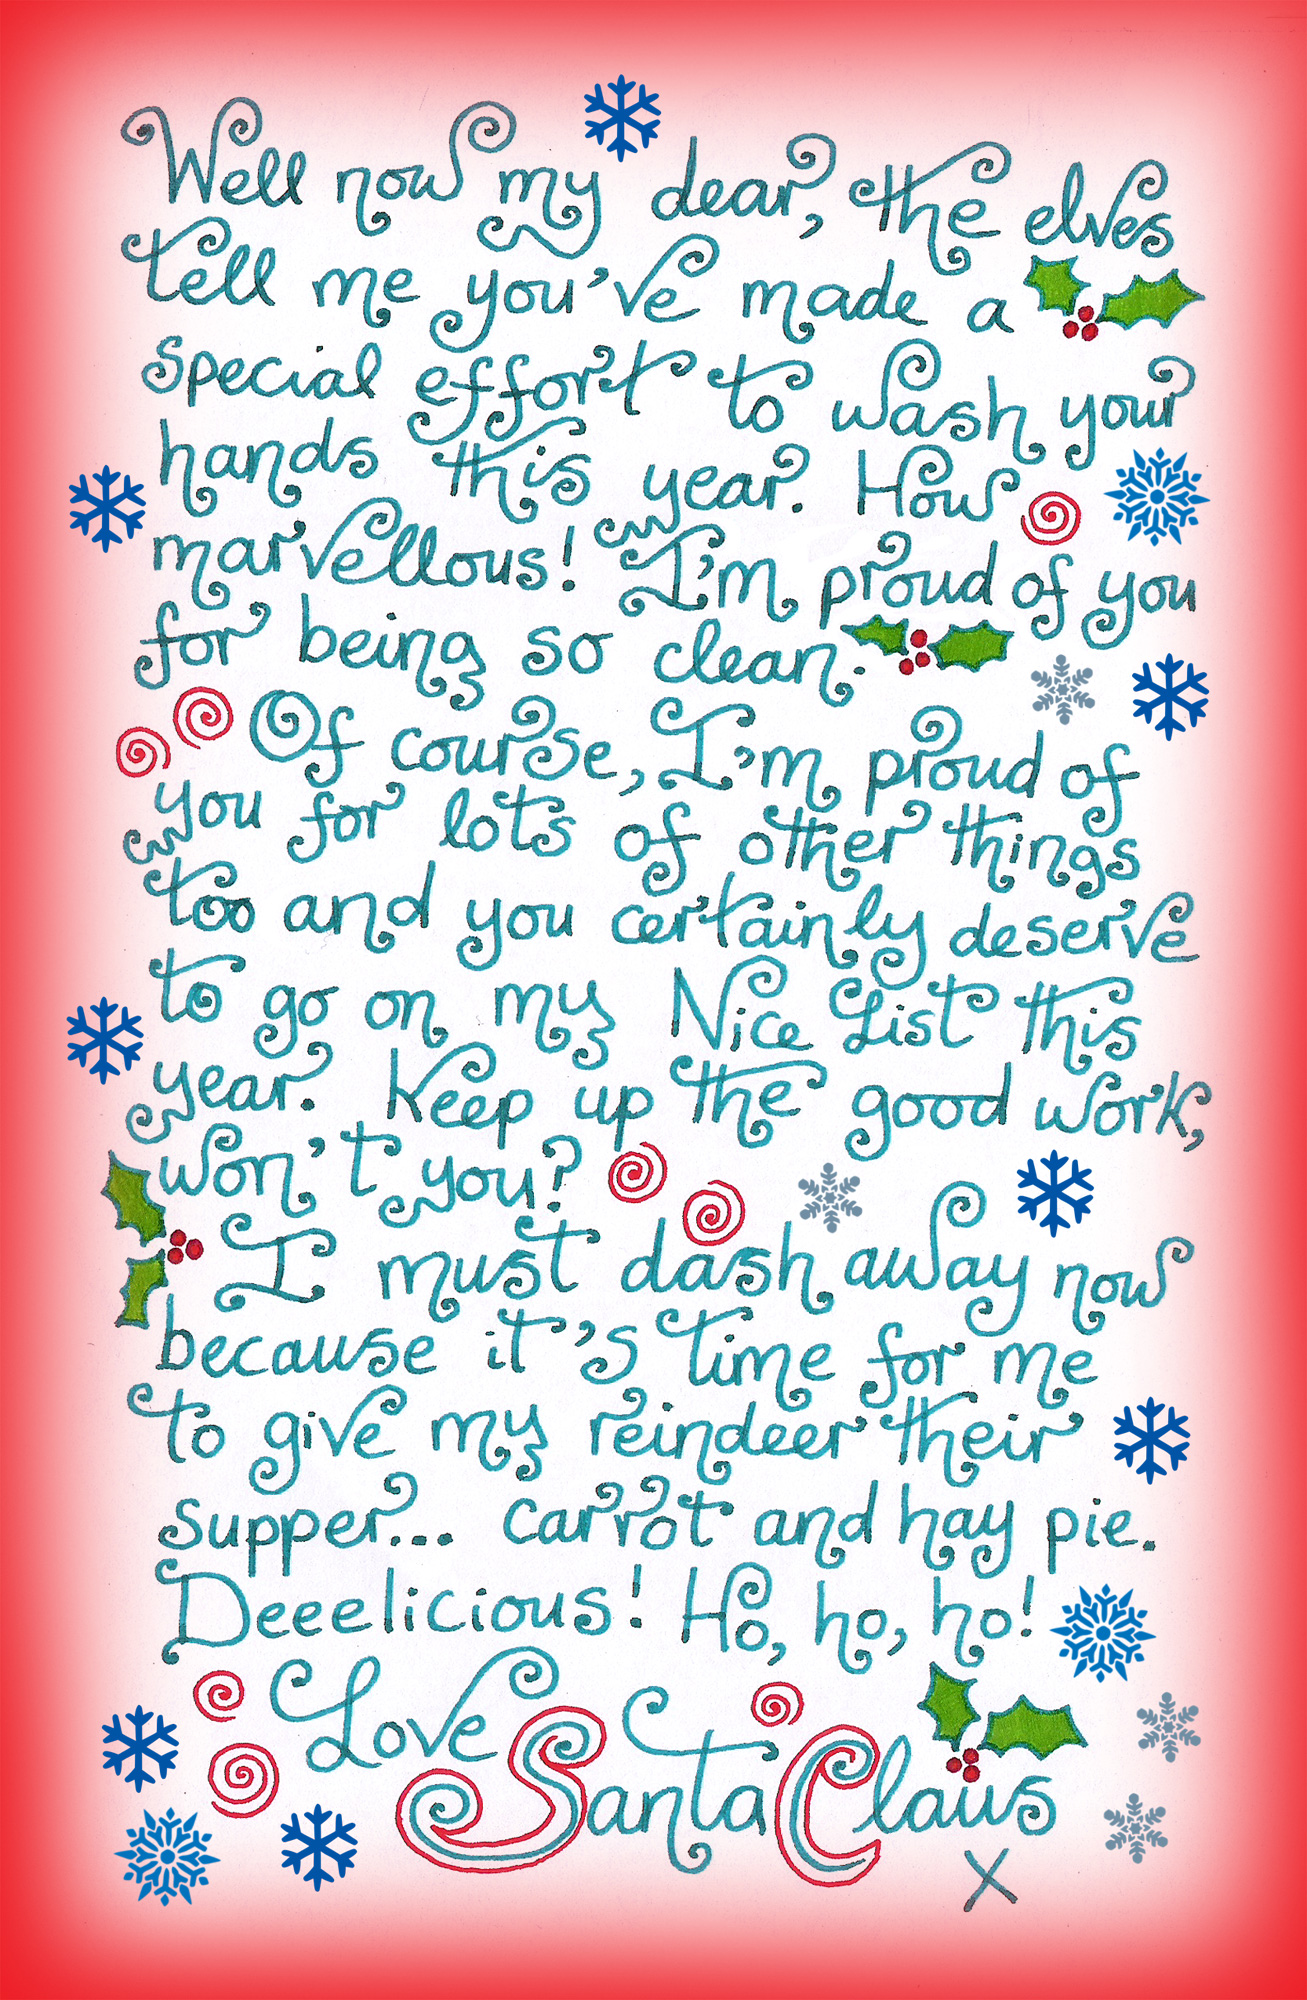 A printable note from Santa saying well done for washing your hands